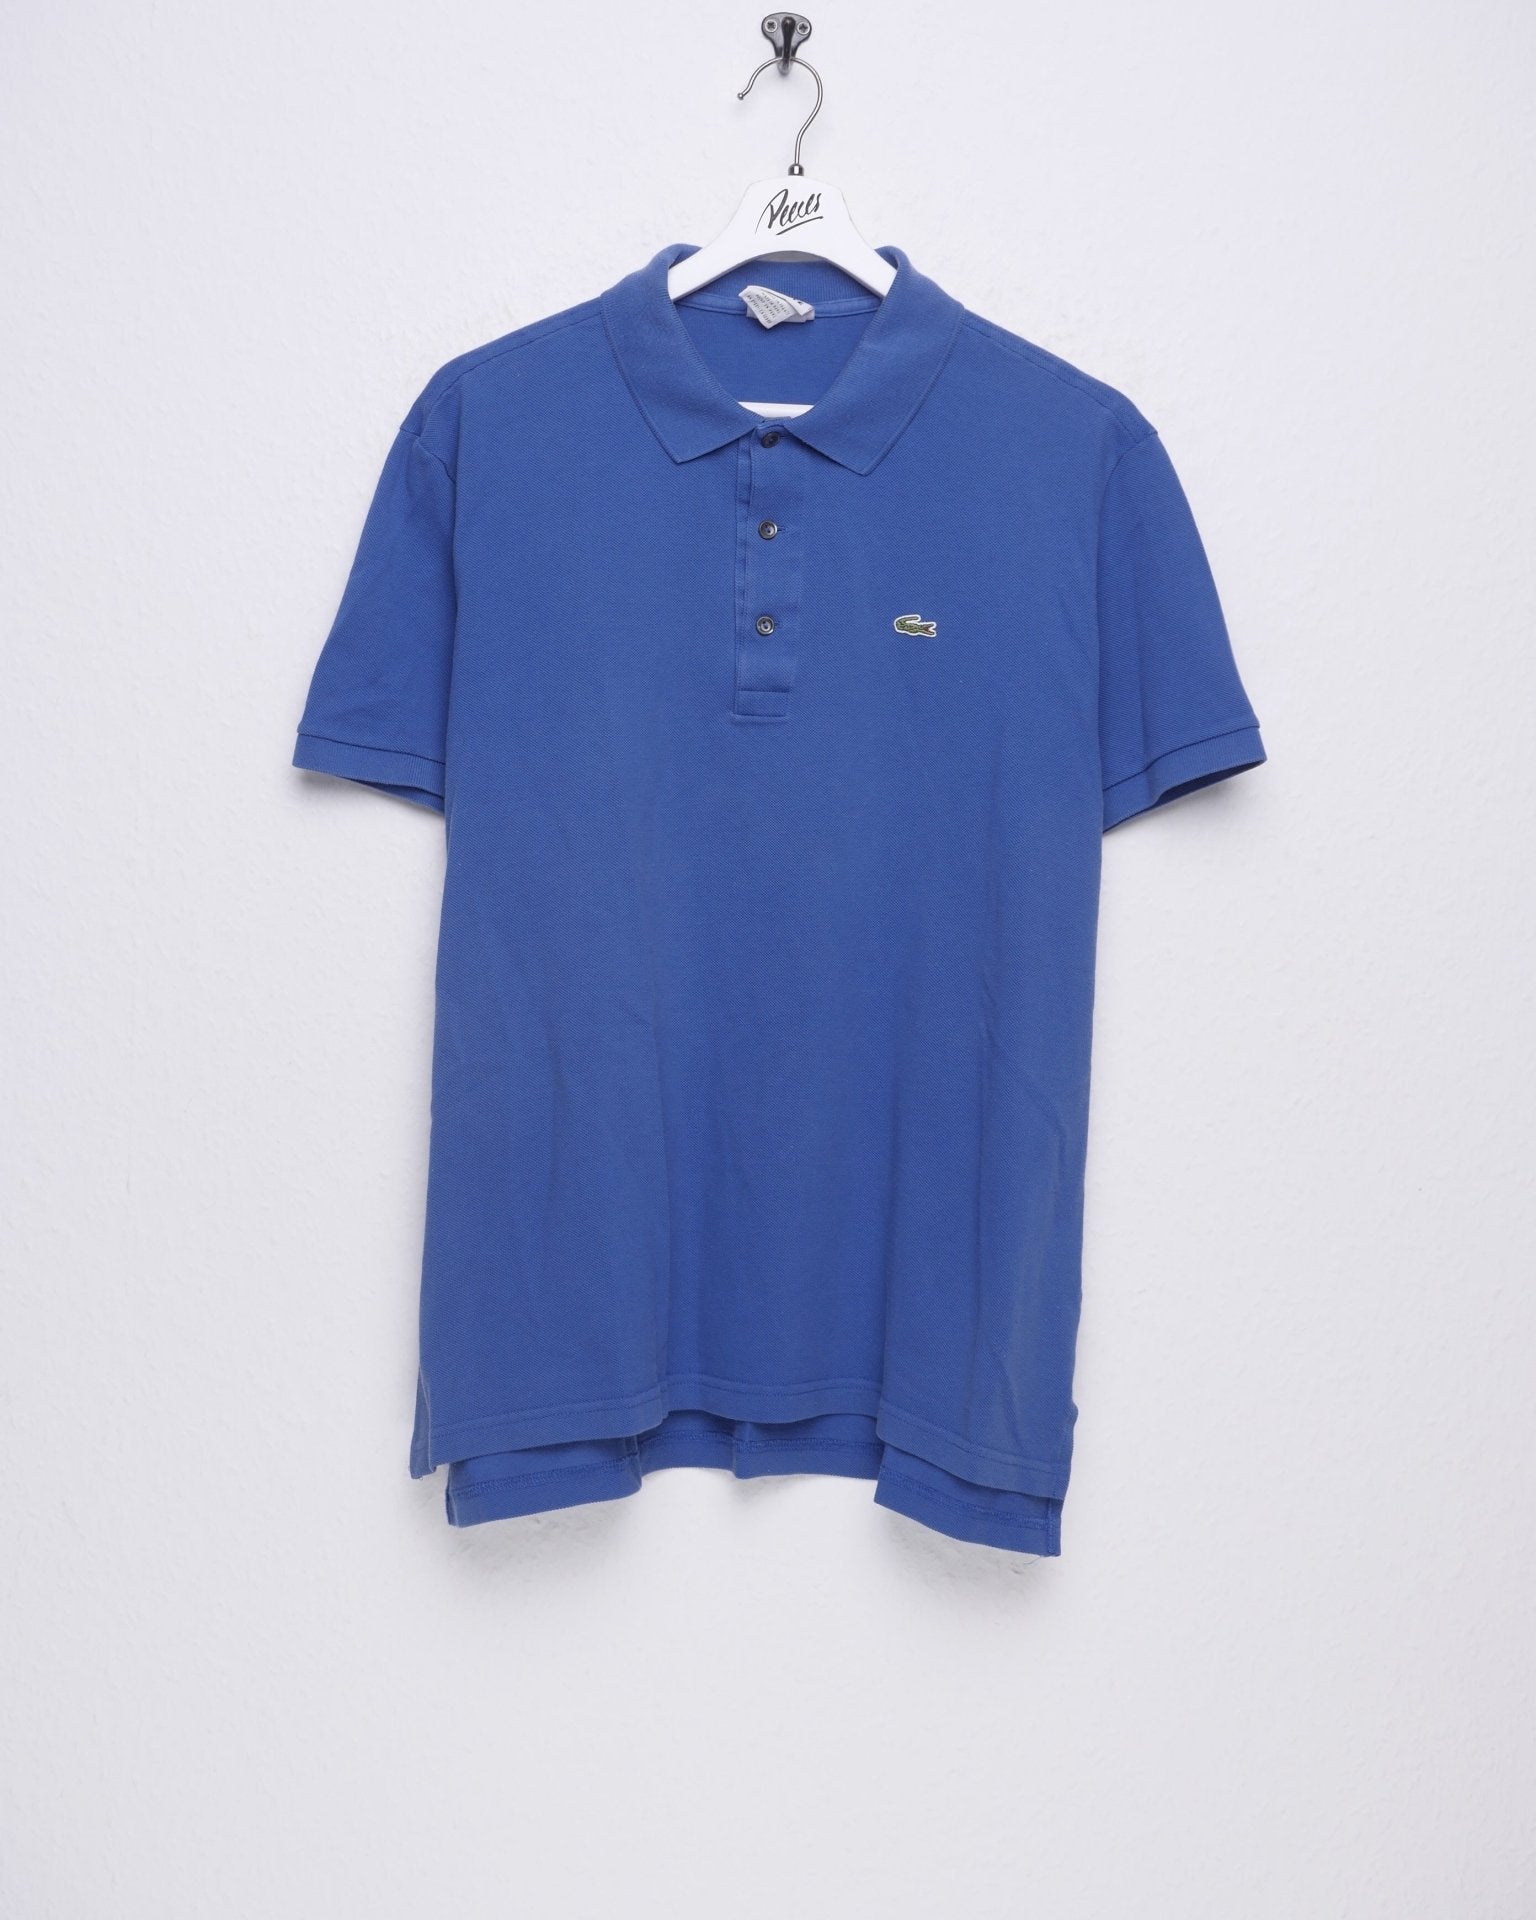 Lacoste embroidered Logo blue S/S Polo Shirt - Peeces